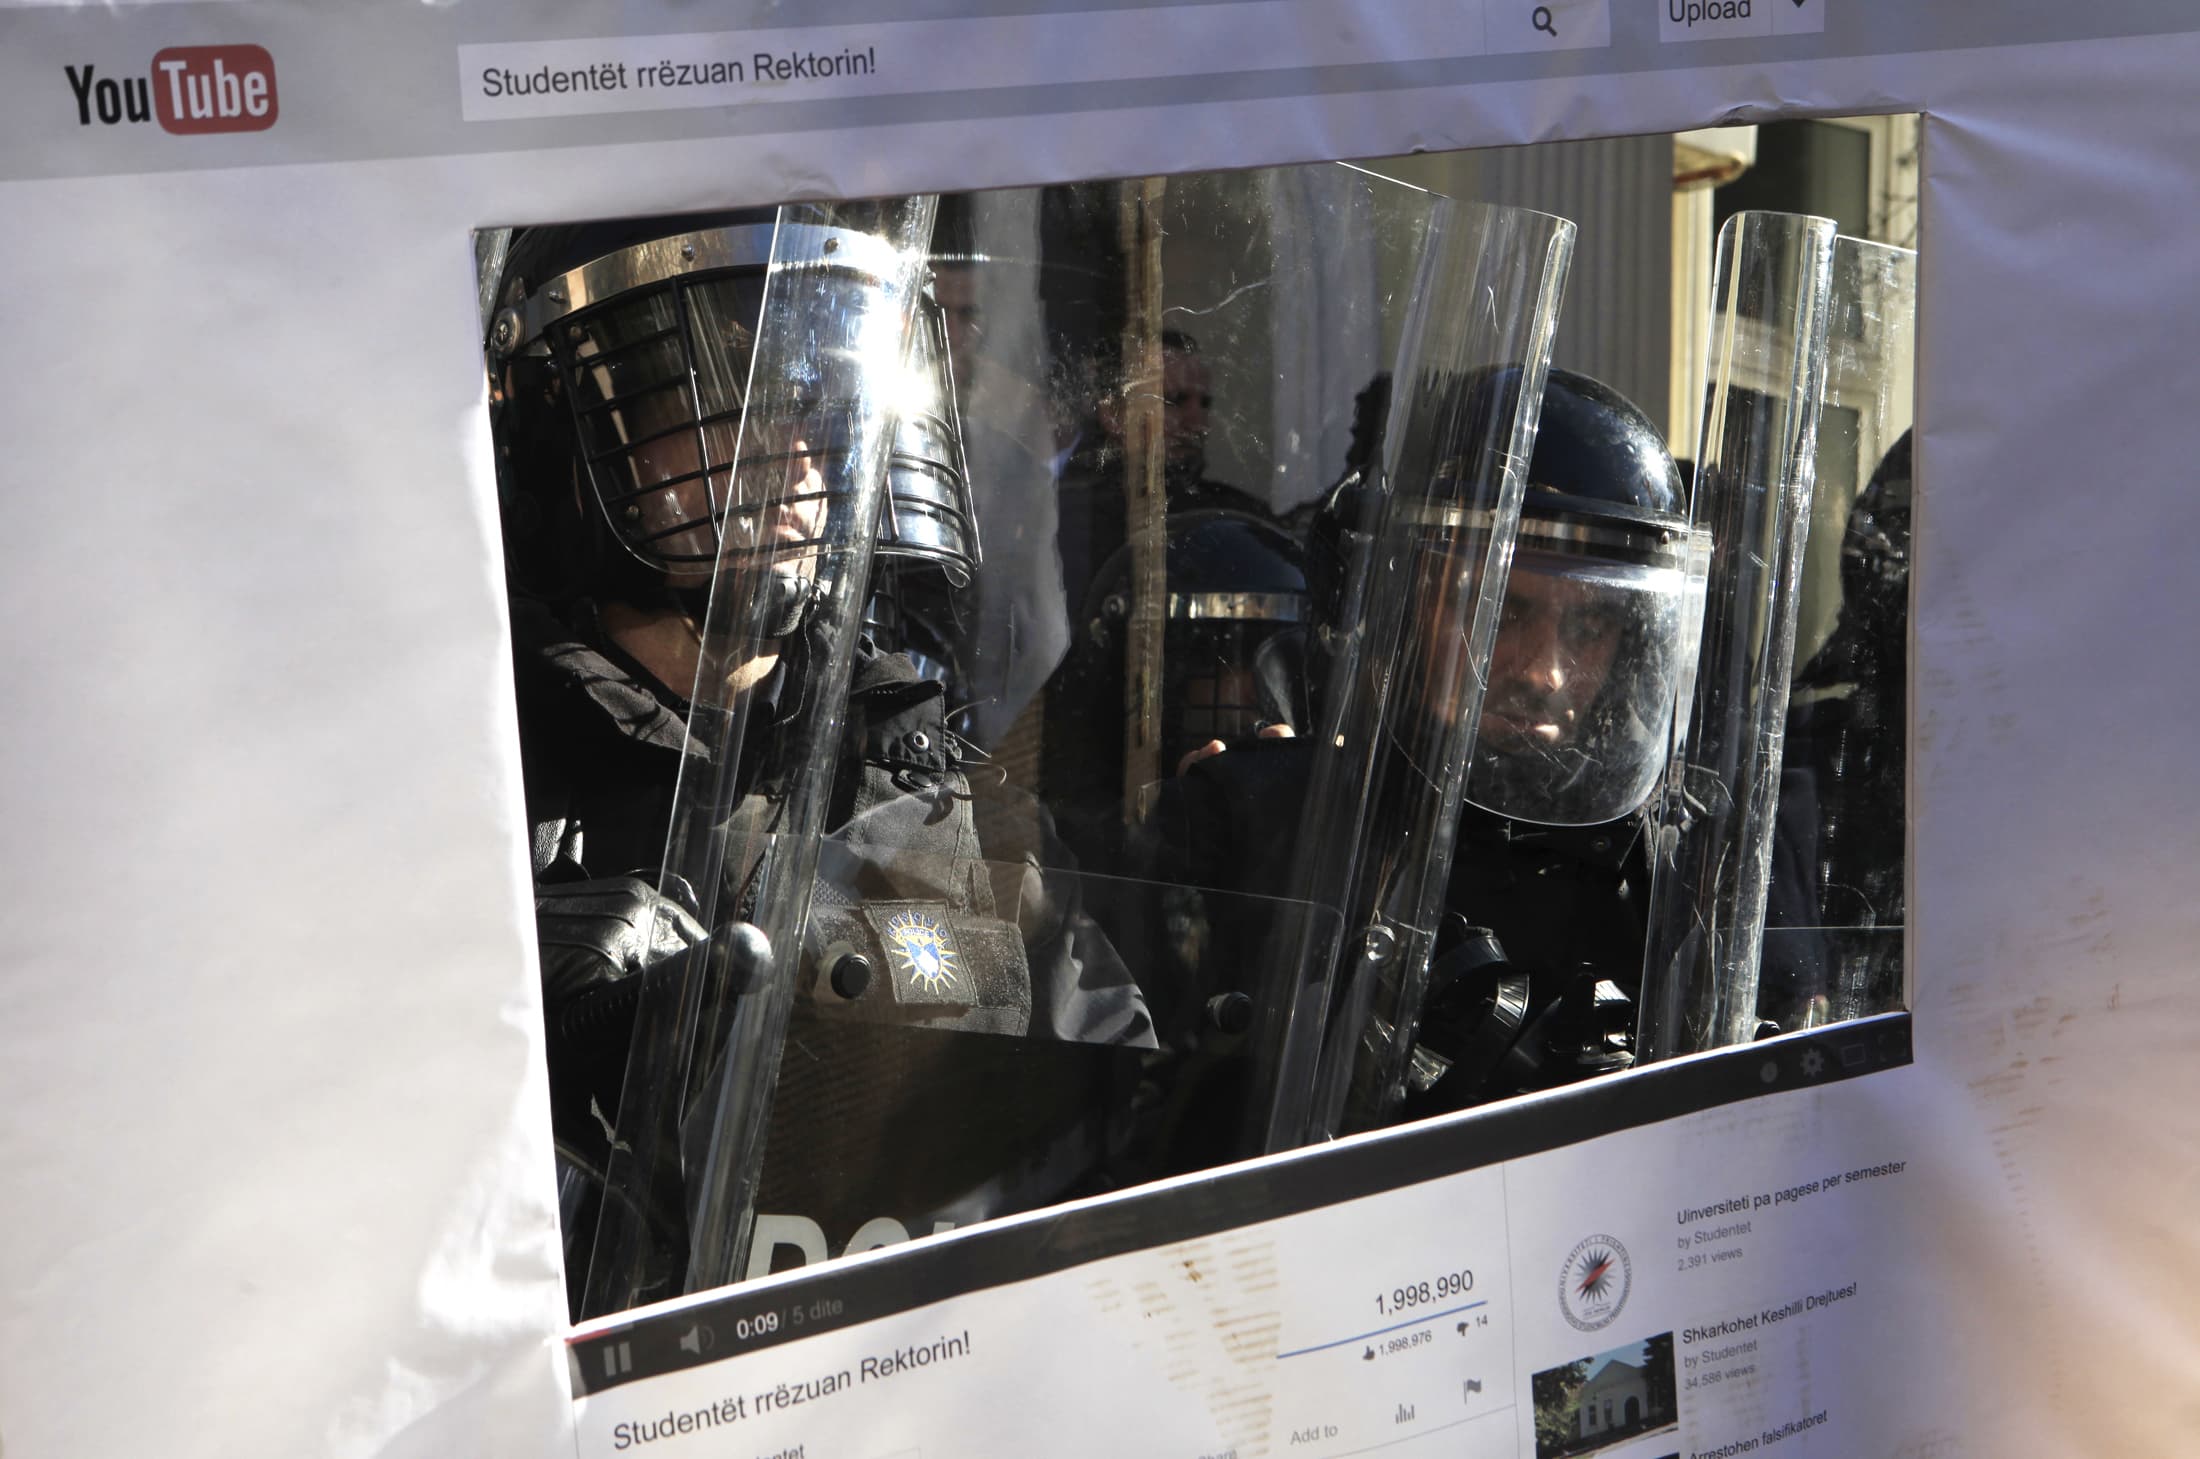 Police officers are seen through a cut-out depicting a YouTube page, during a clash with students, at the University of Pristina, Kosovo, 3 February 2014., REUTERS/Hazir Reka